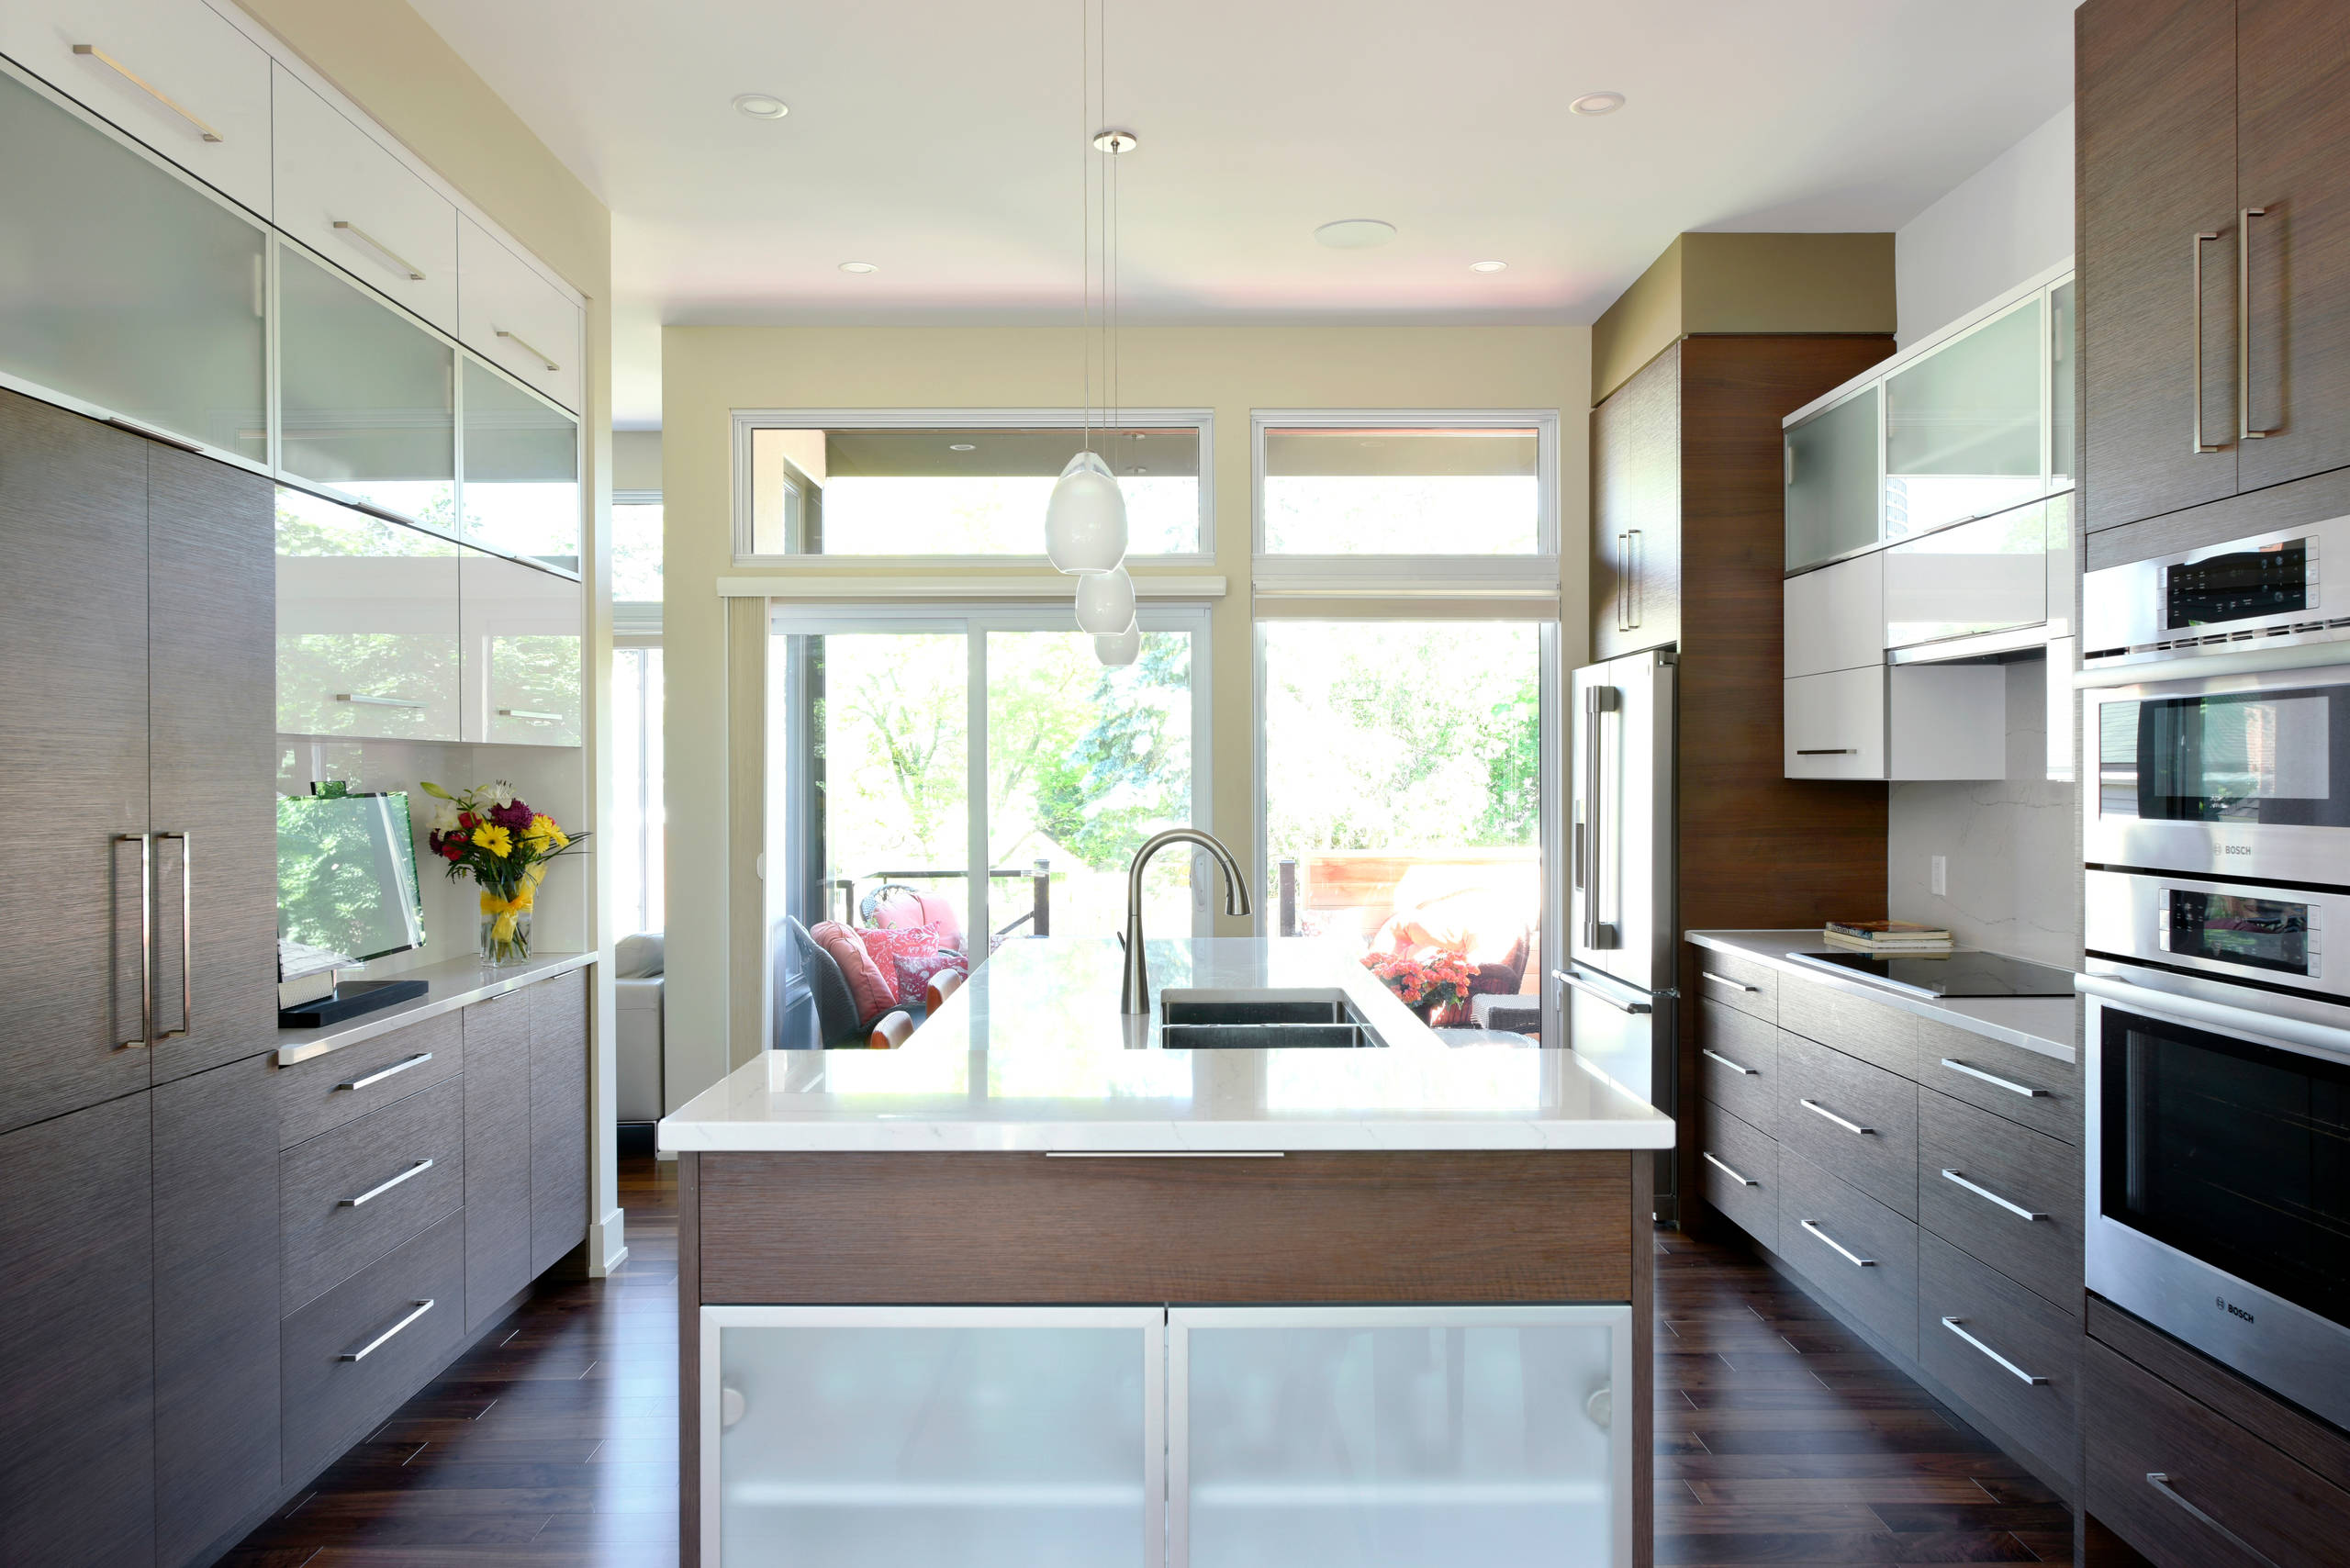 A bright, modern kitchen with flat-panel cabinet doors